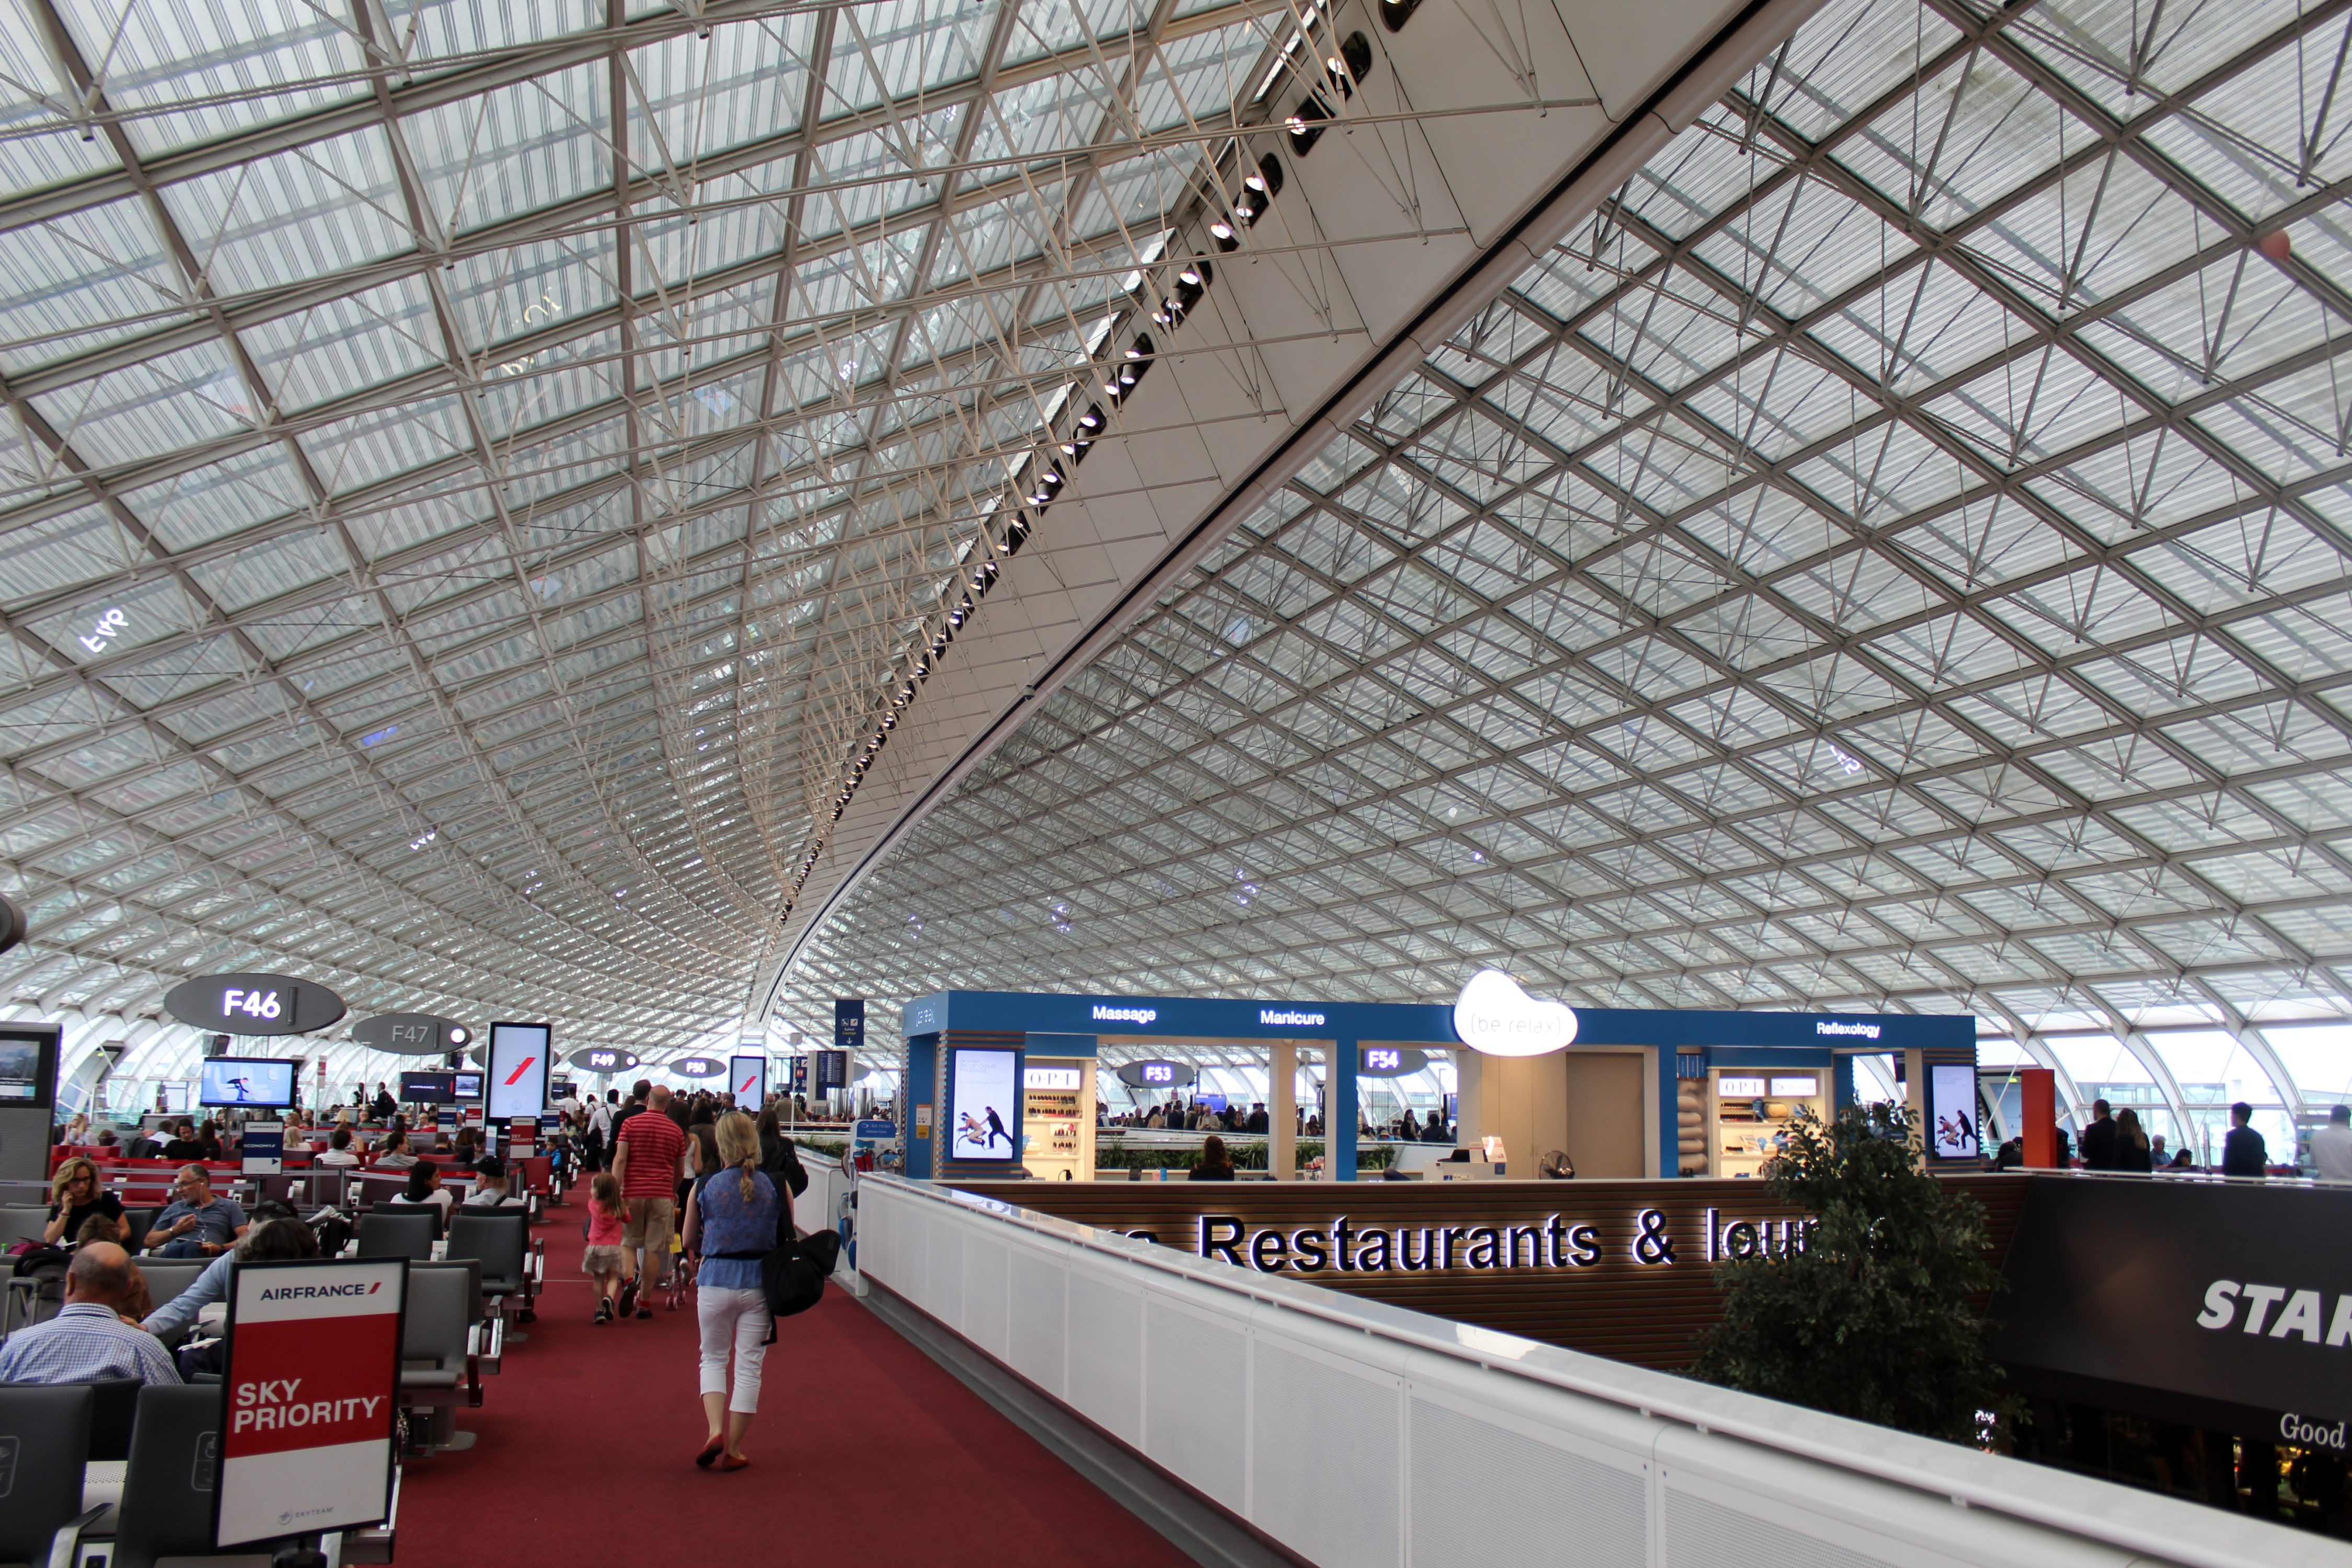 Charles de Gaulle Airport for a Delightful Airport Experience